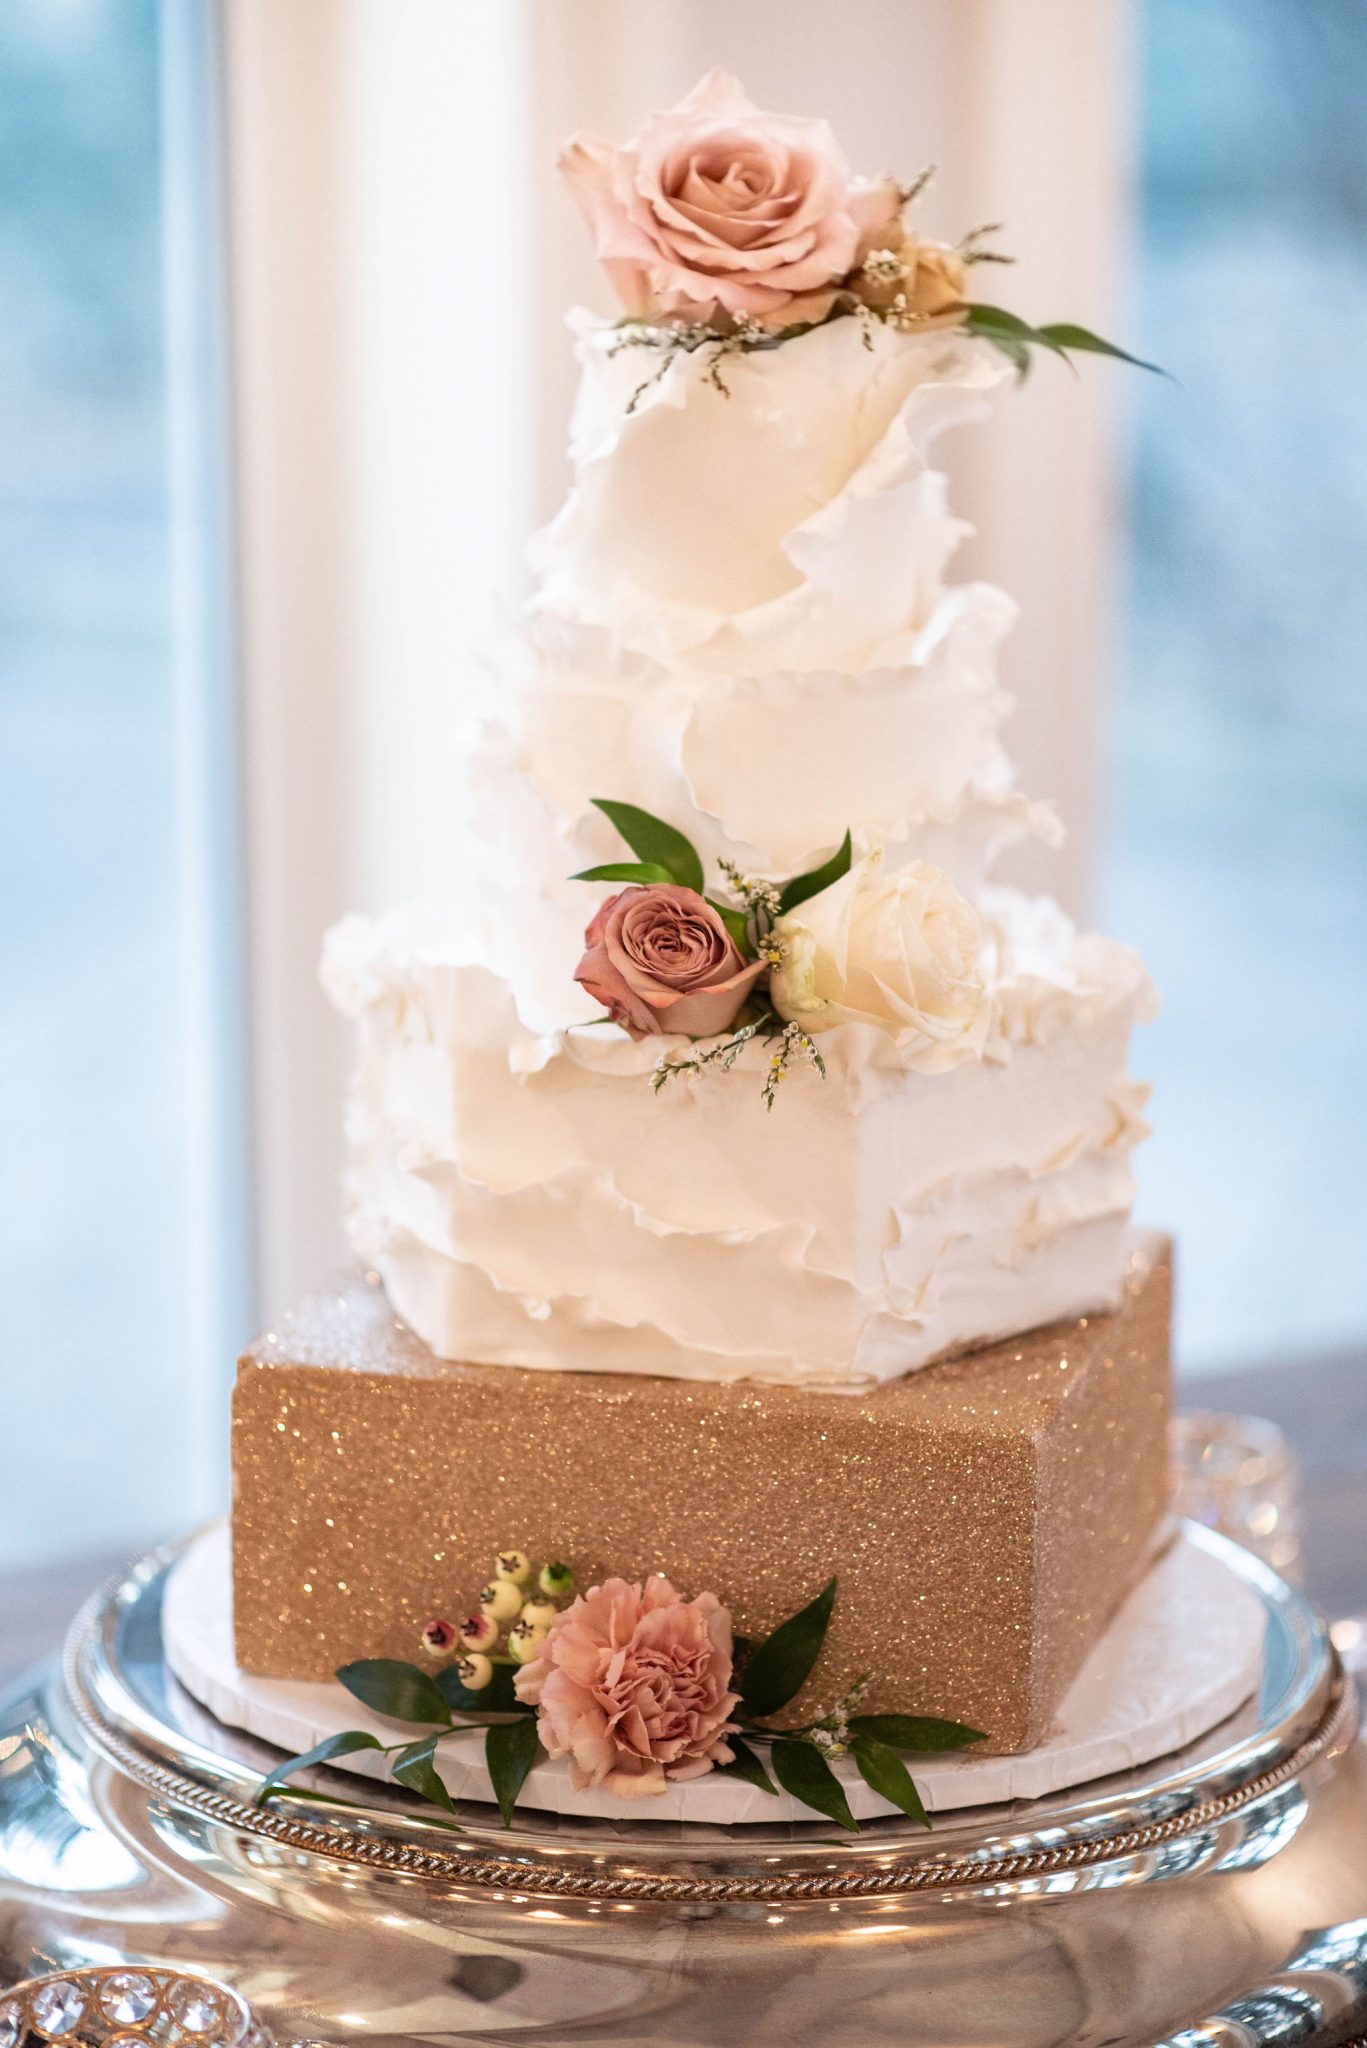 Three tier enchanting wedding cake design with soft white and metallic gold features adorned with pink flowers